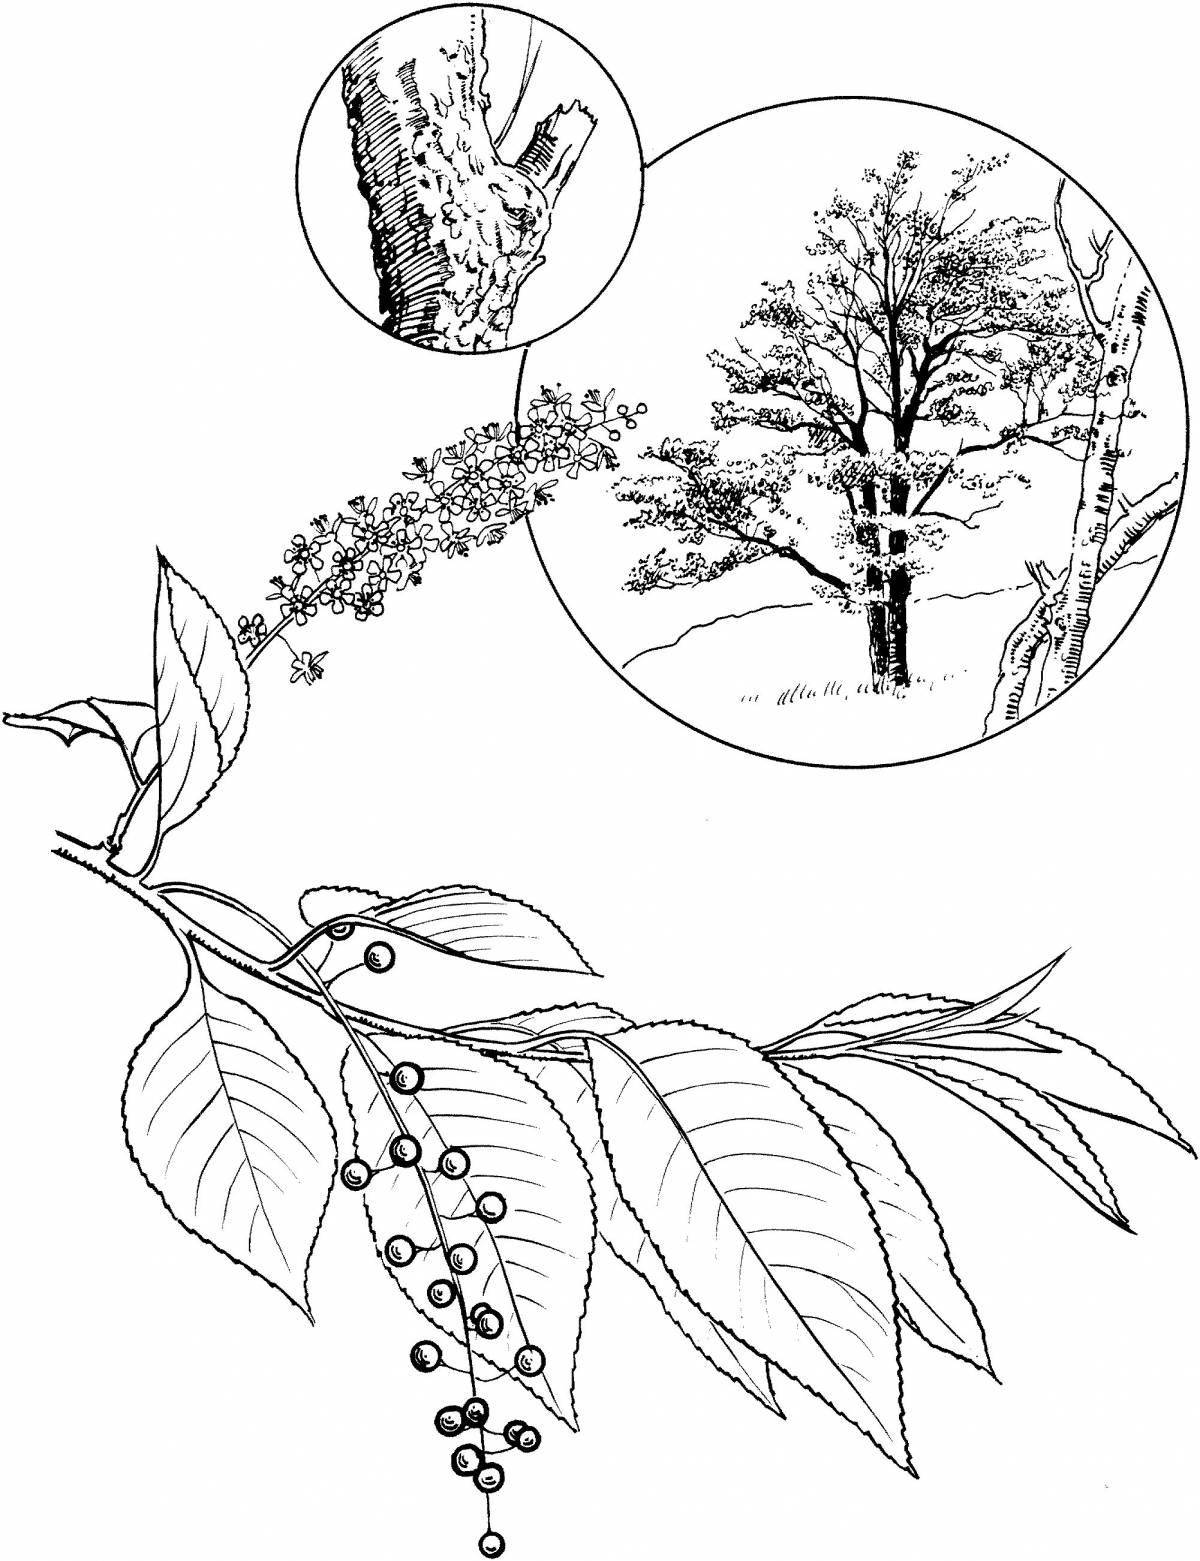 Shiny cherry bird coloring pages for students